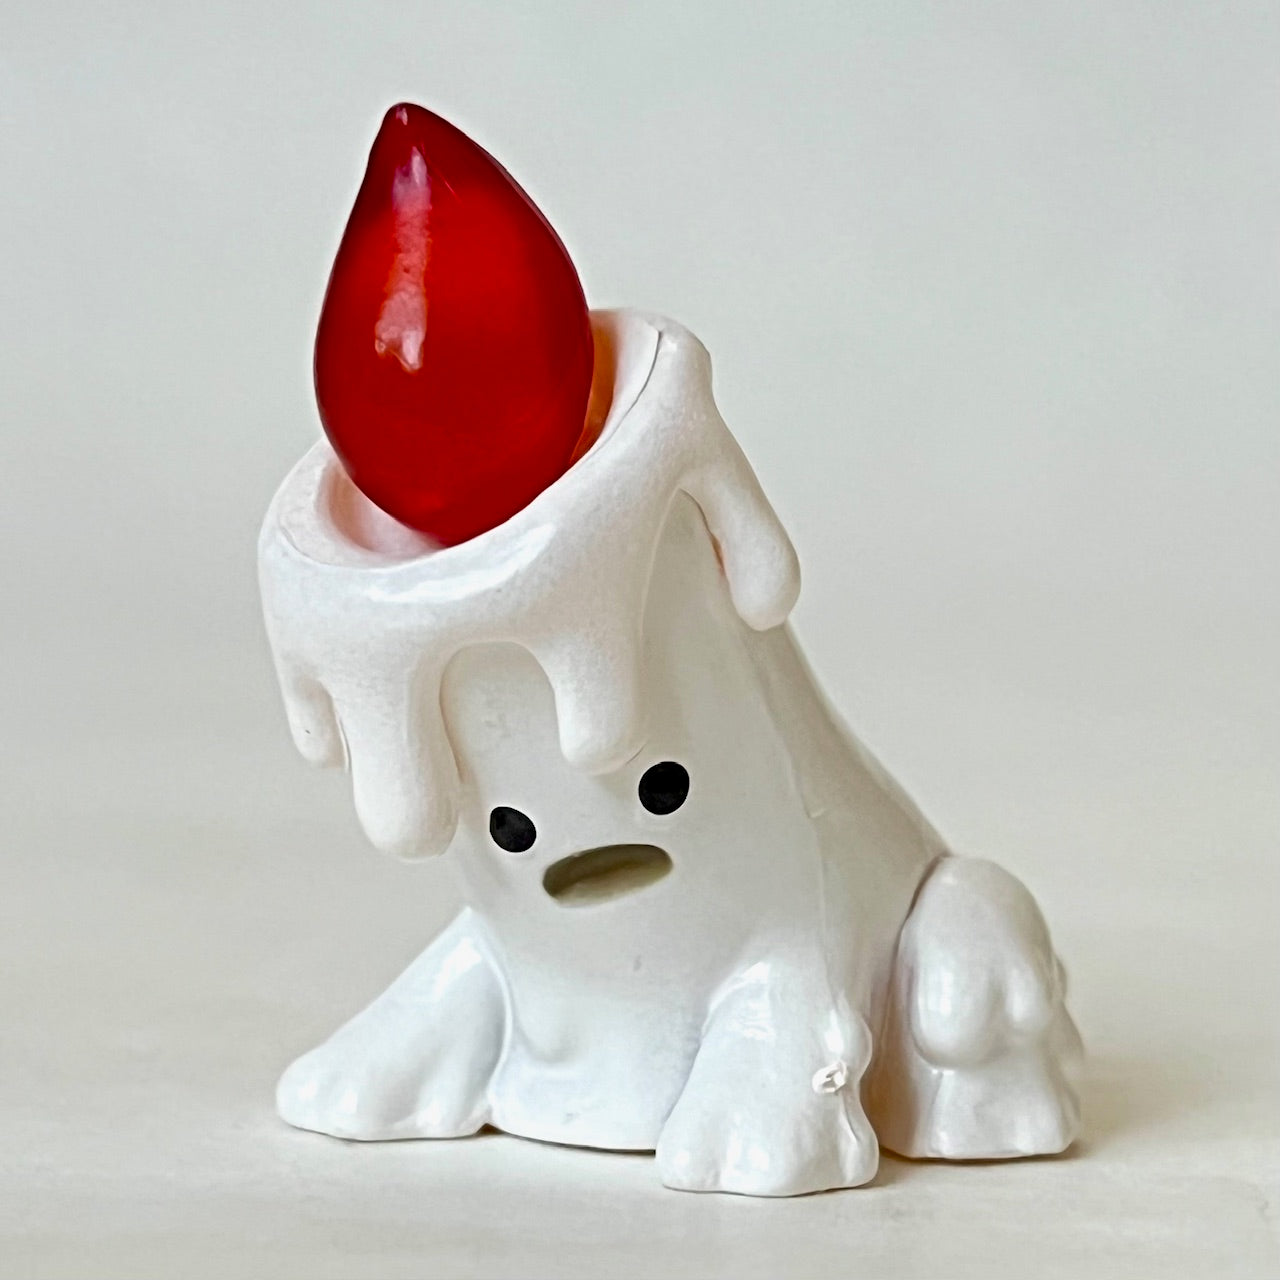 X 70316 Melty Buddies Figurines Capsule-DISCONTINUED